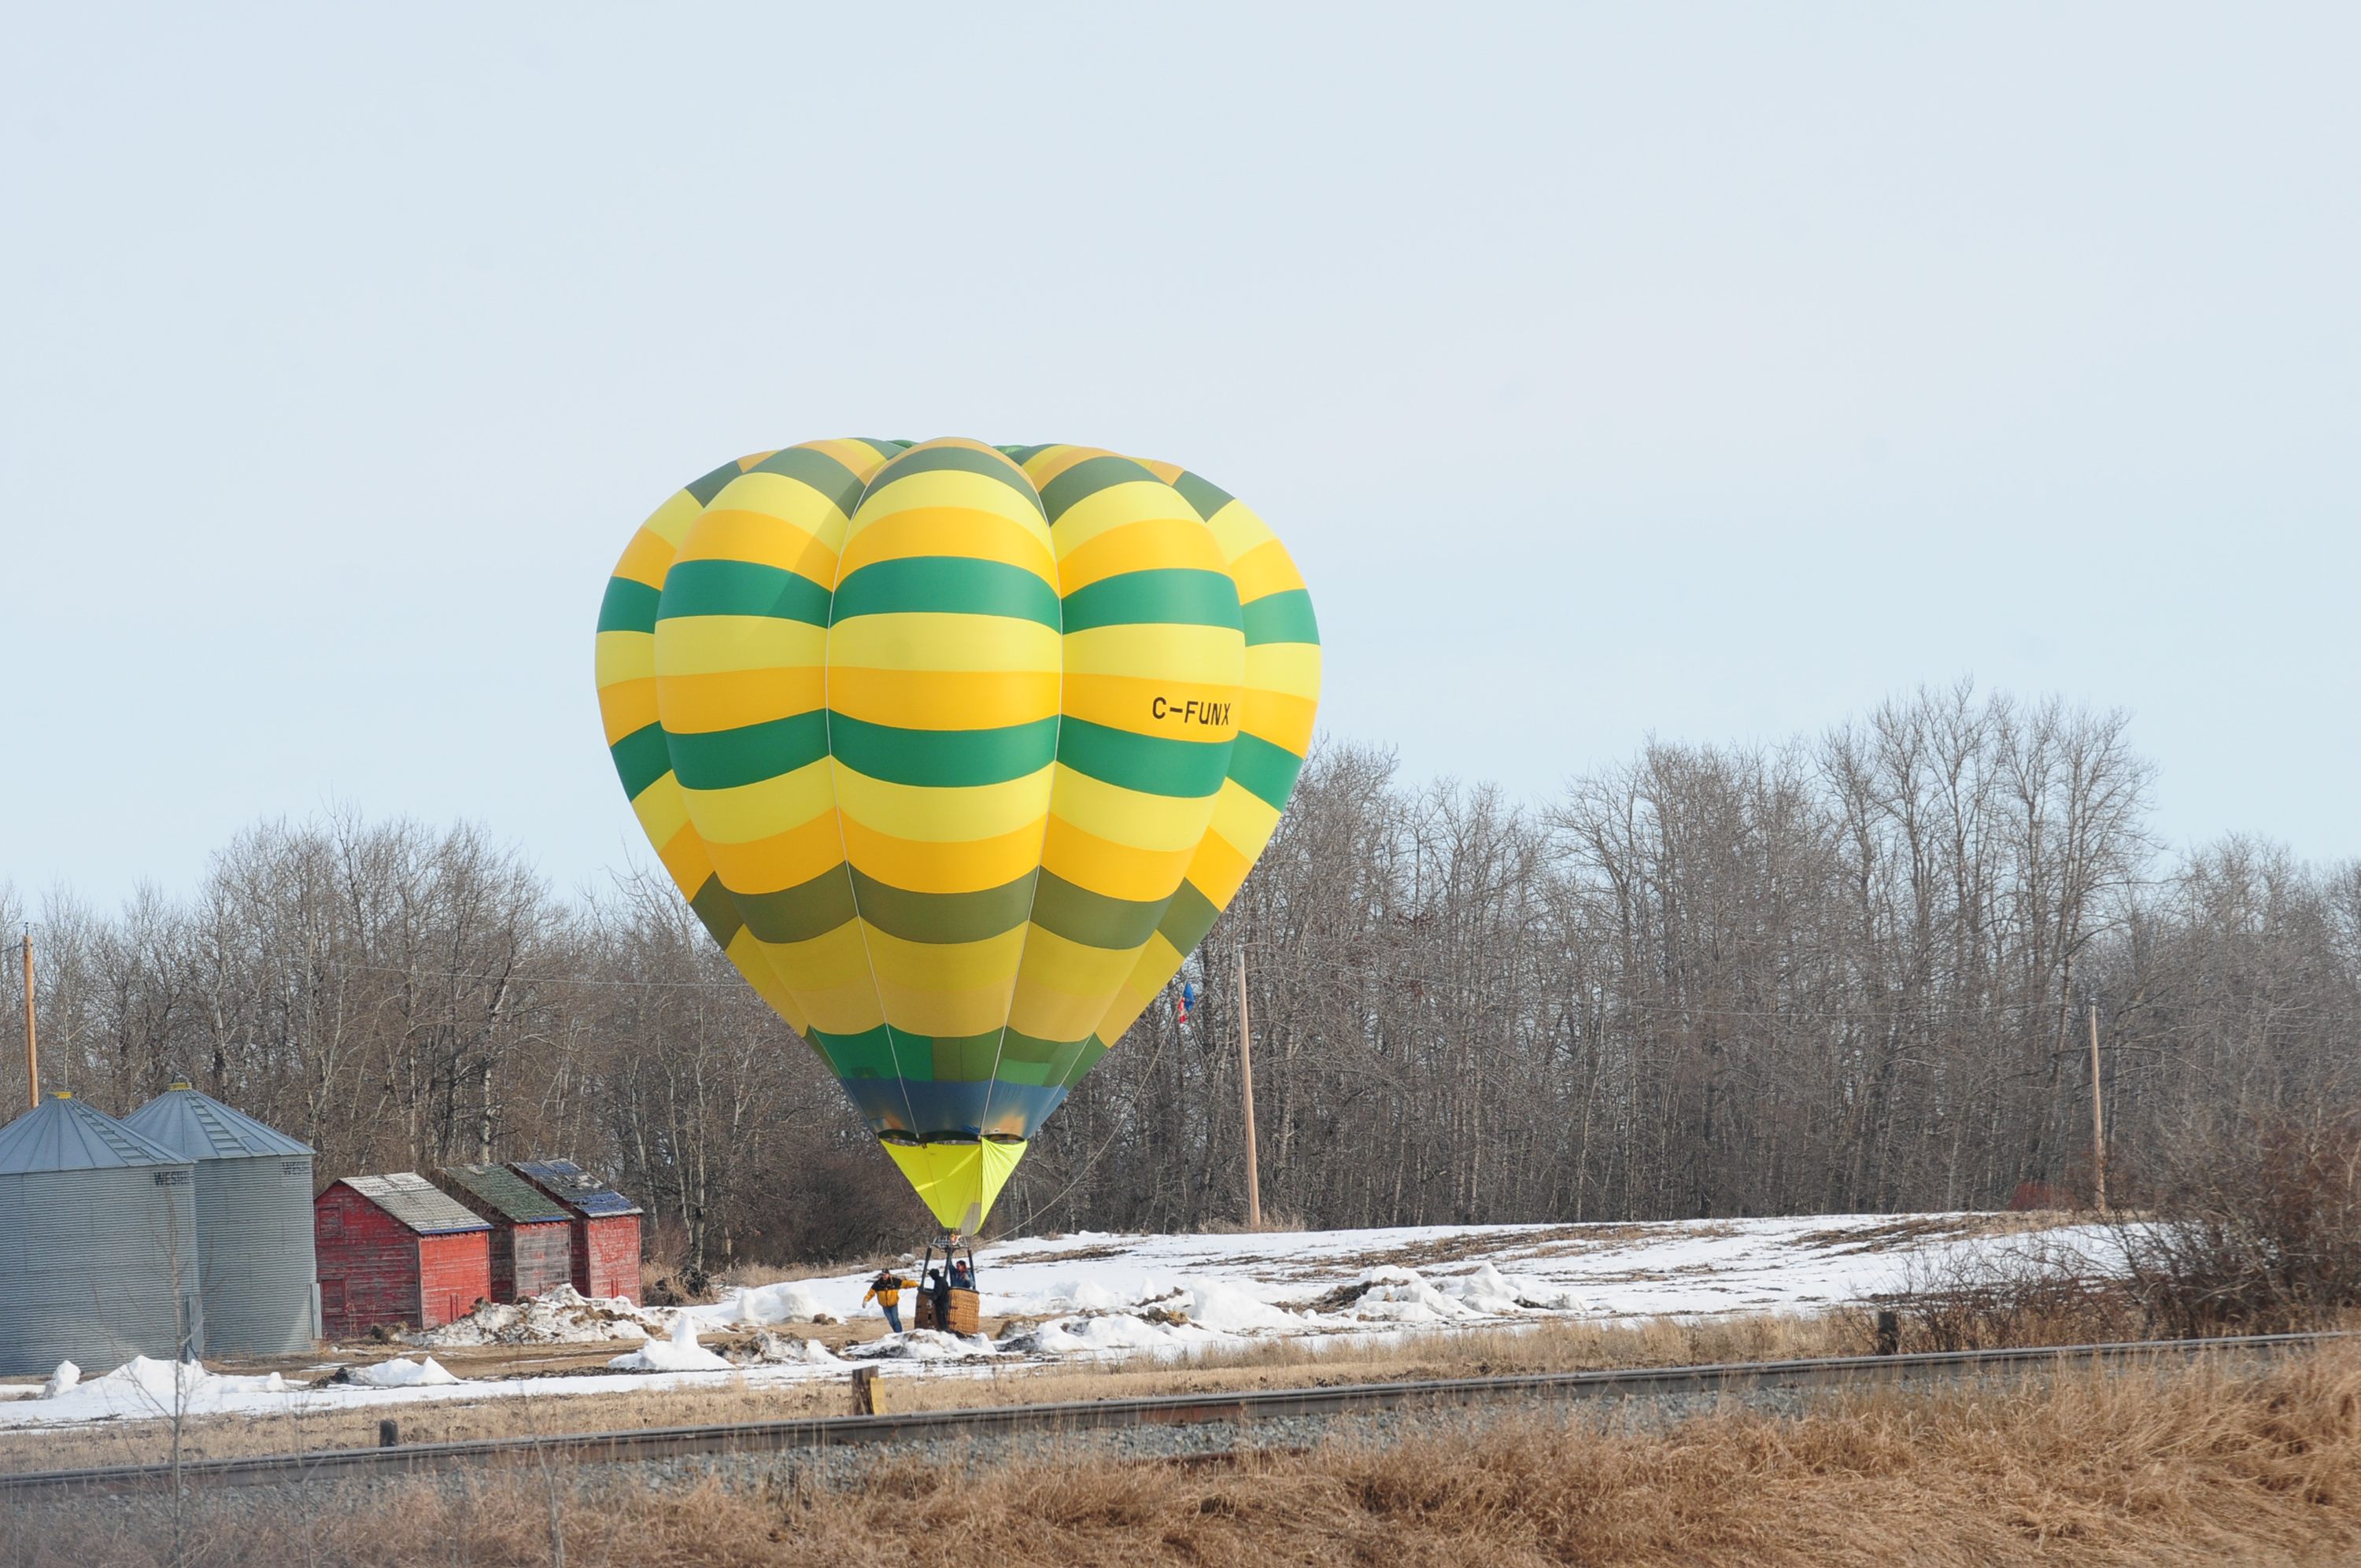 LANDING- A hot air balloon lands in a field and prepares to deflate after a morning of floating above the City.